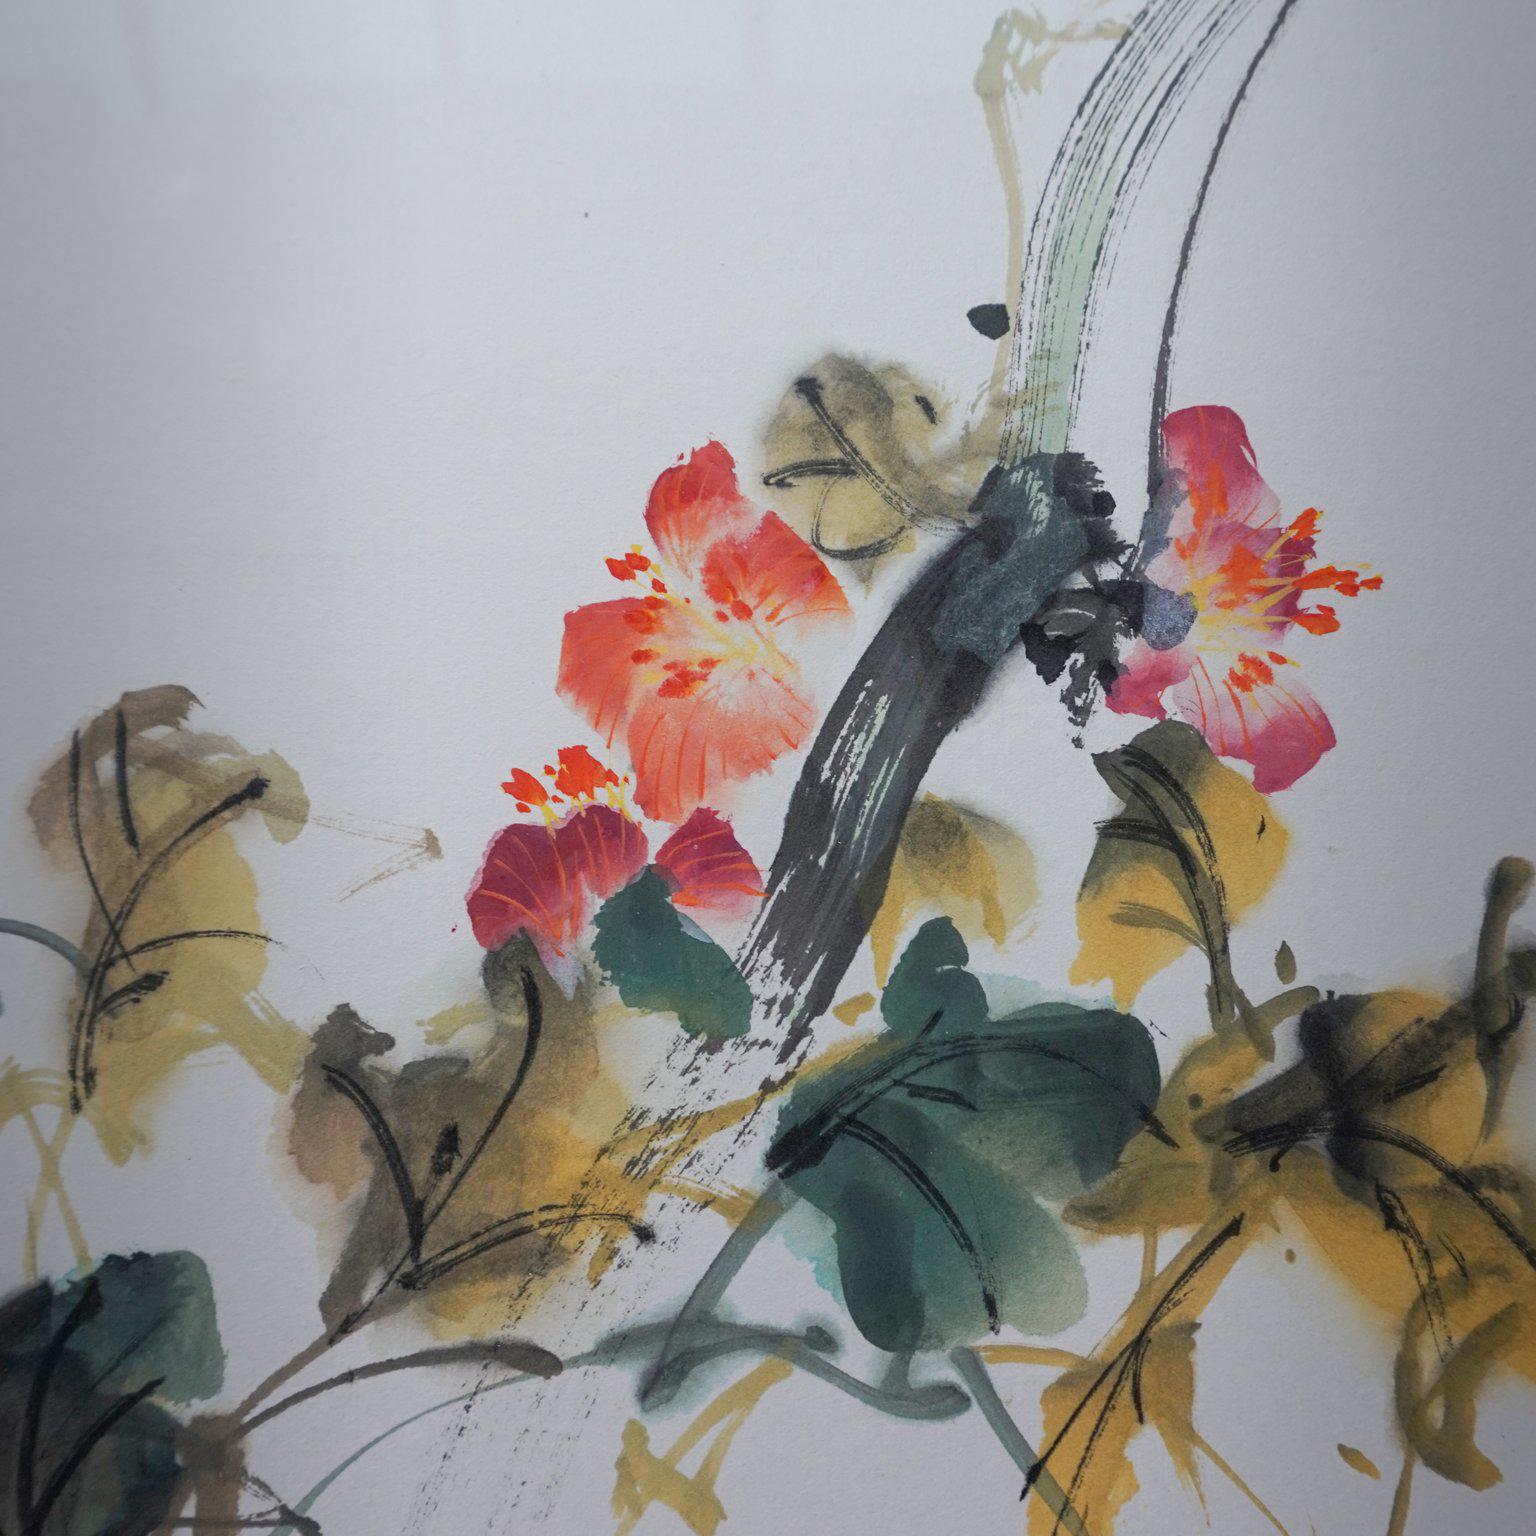 Painted Framed Chinese Watercolor Painting 'Bird on Flower' by Zhao Shao Ang in 1987 For Sale